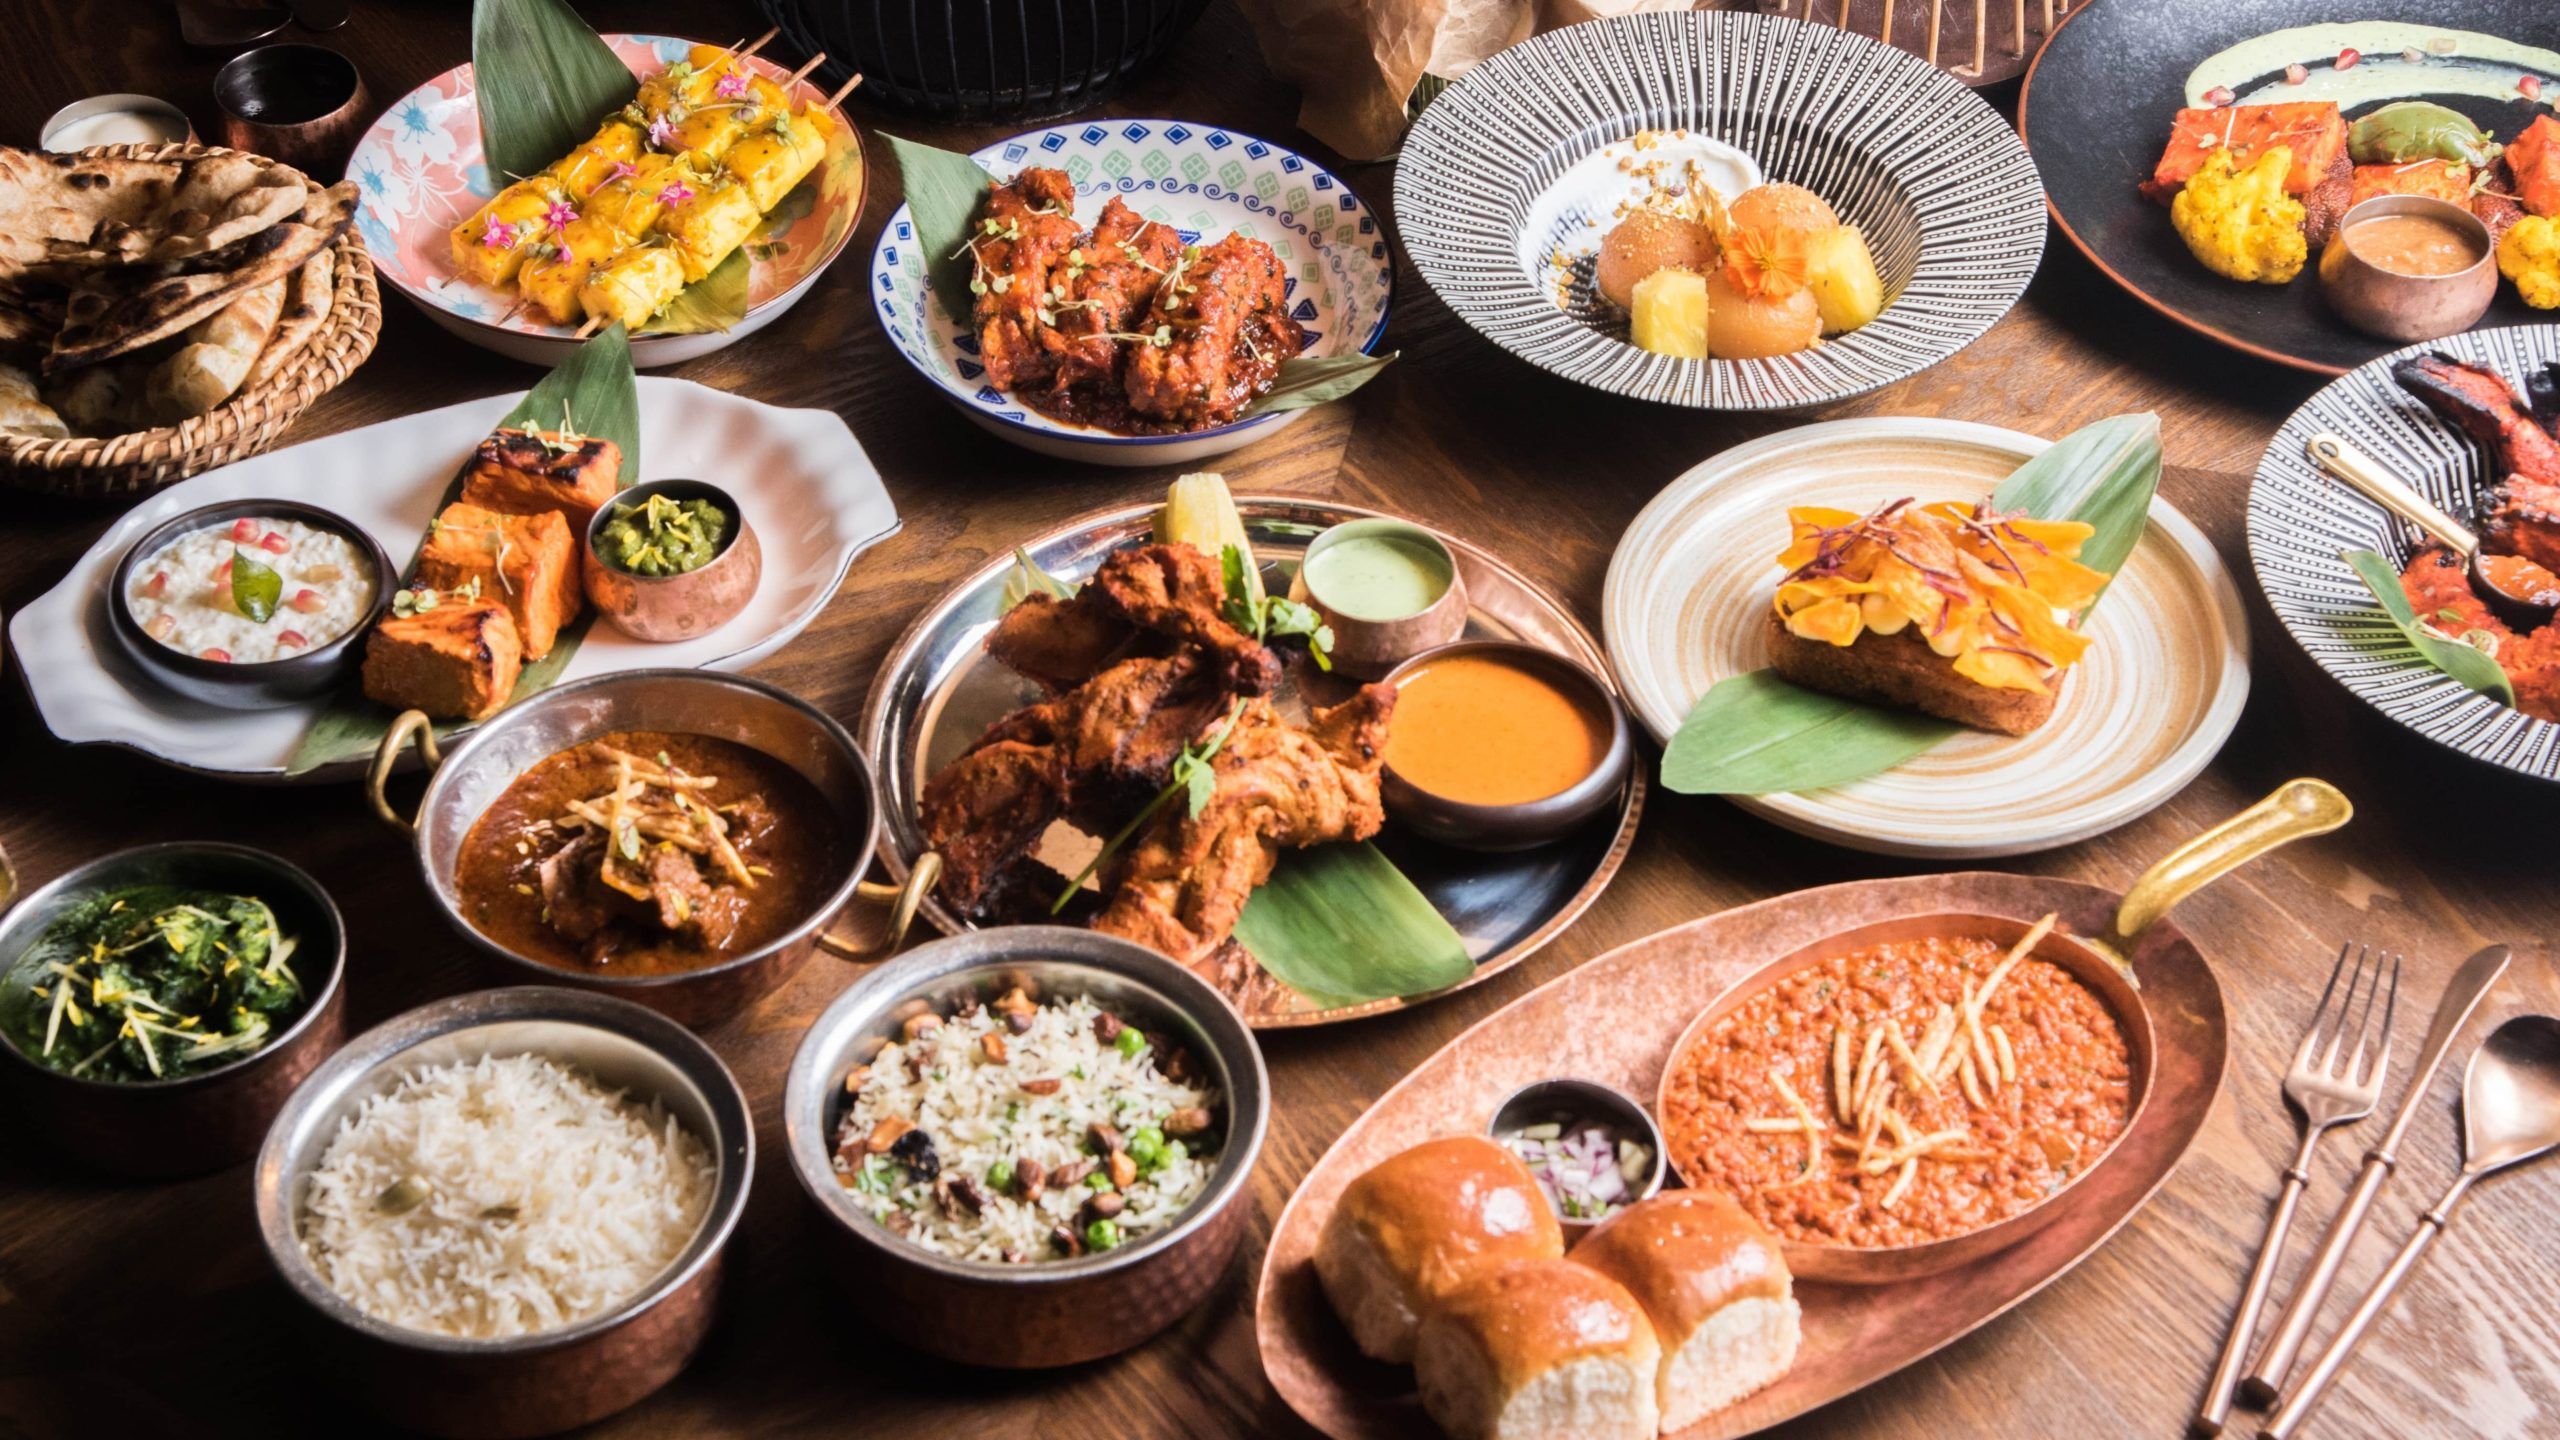 Ordering in? Here are Hong Kong’s top delivery and takeaway menus, depending on your cravings